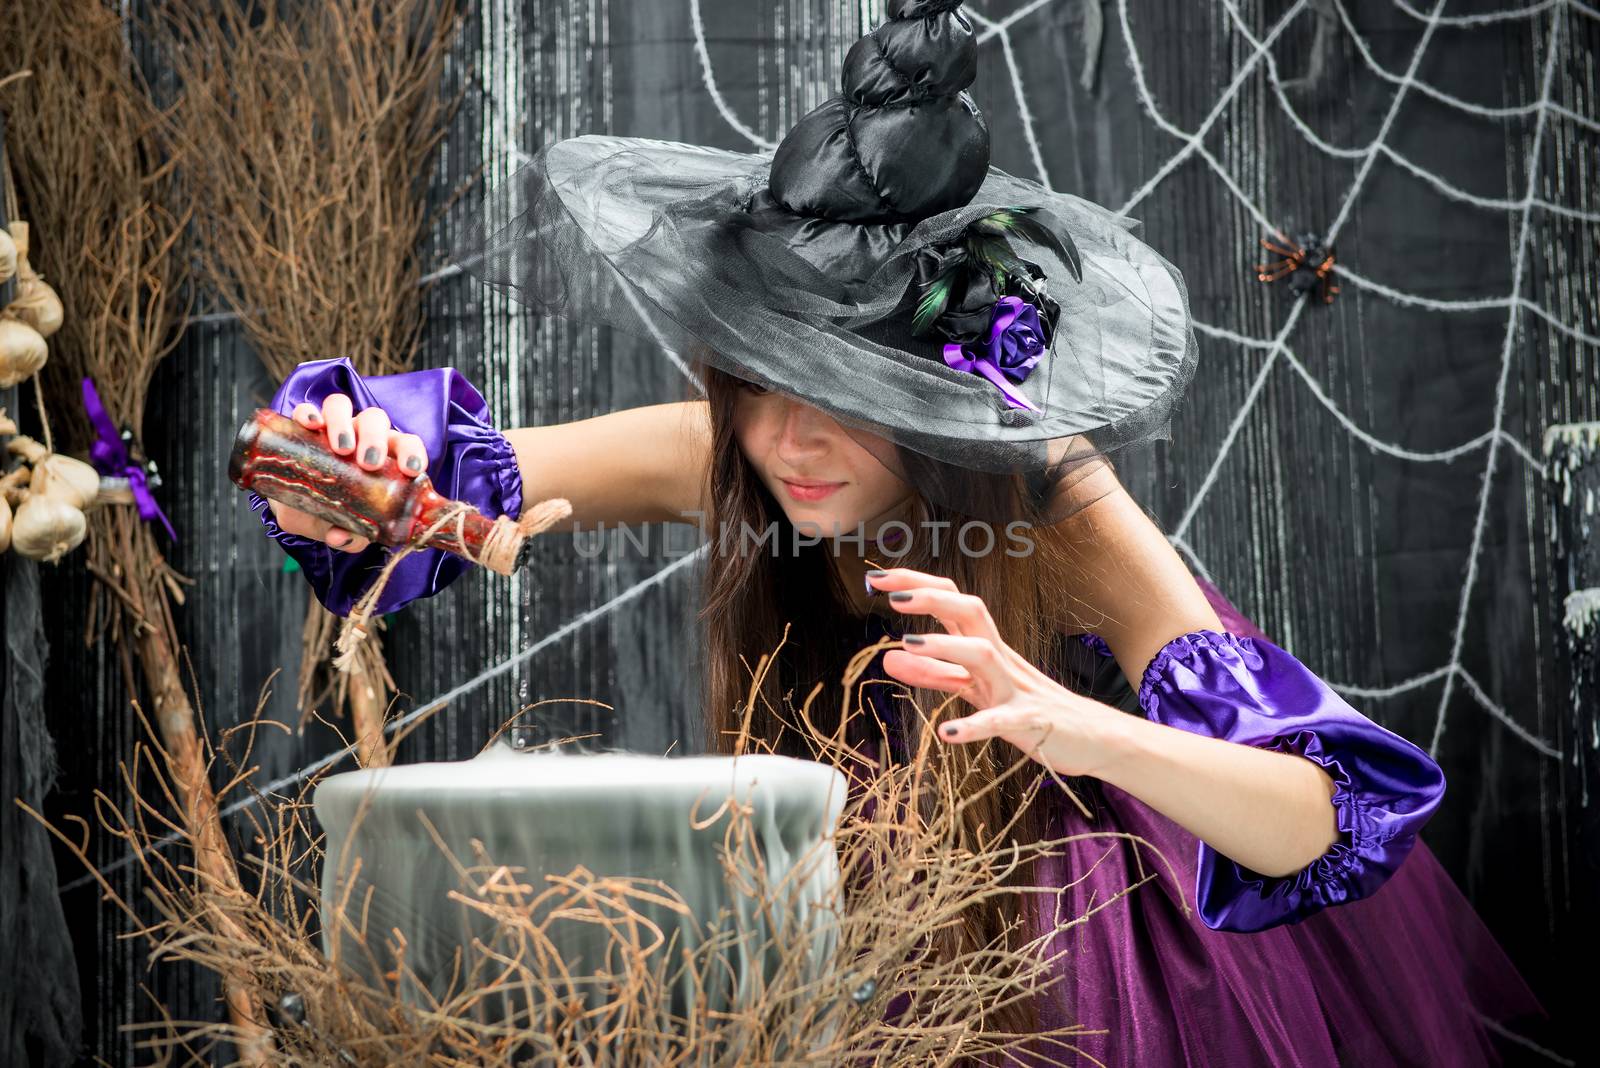 An experienced sorceress poured into a cauldron, a potion from a bottle